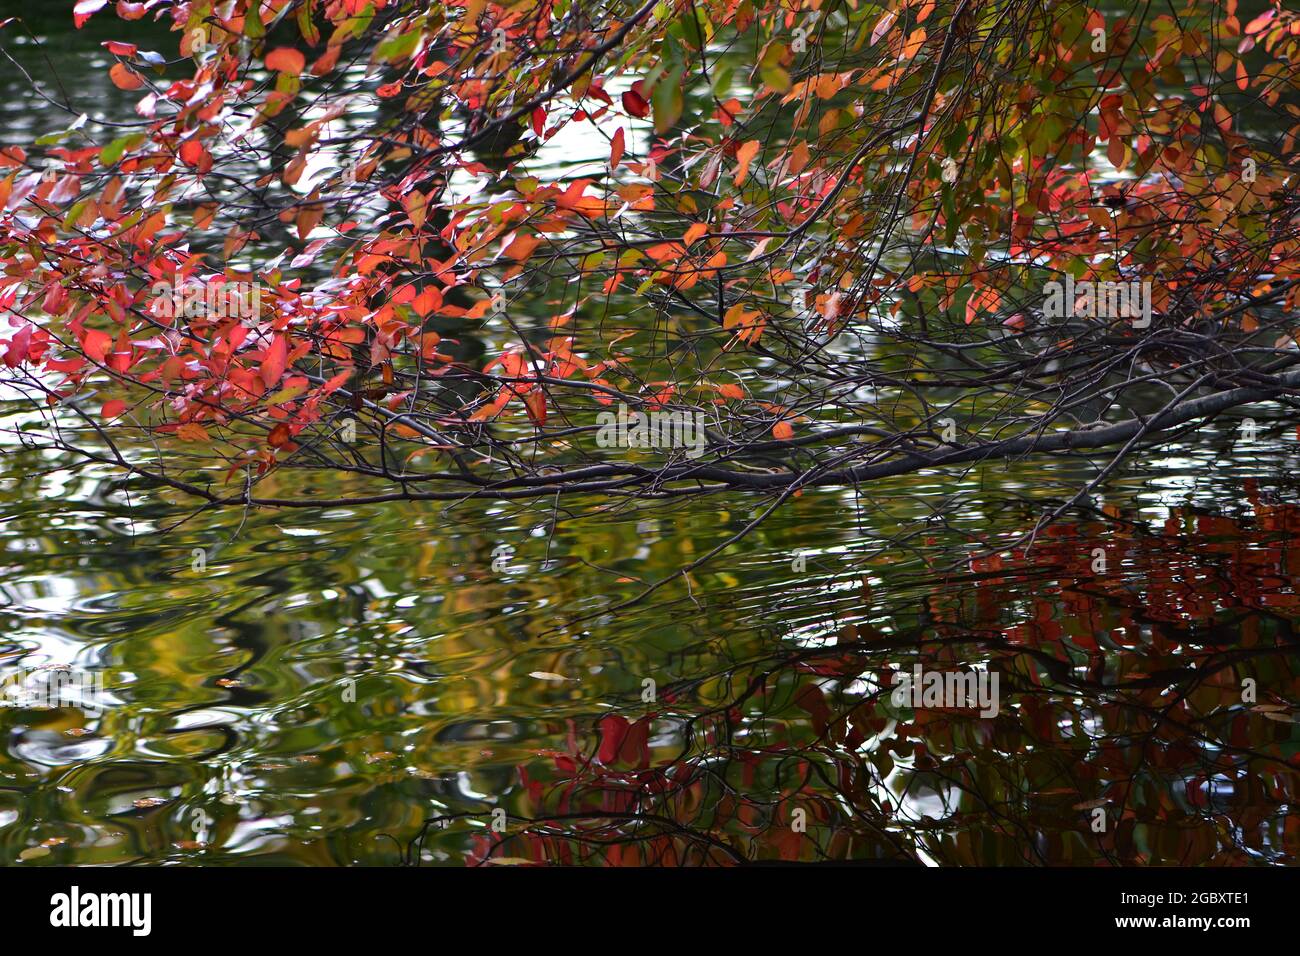 Tree branches with autumn colourful leaves above green pond water surface. Stock Photo